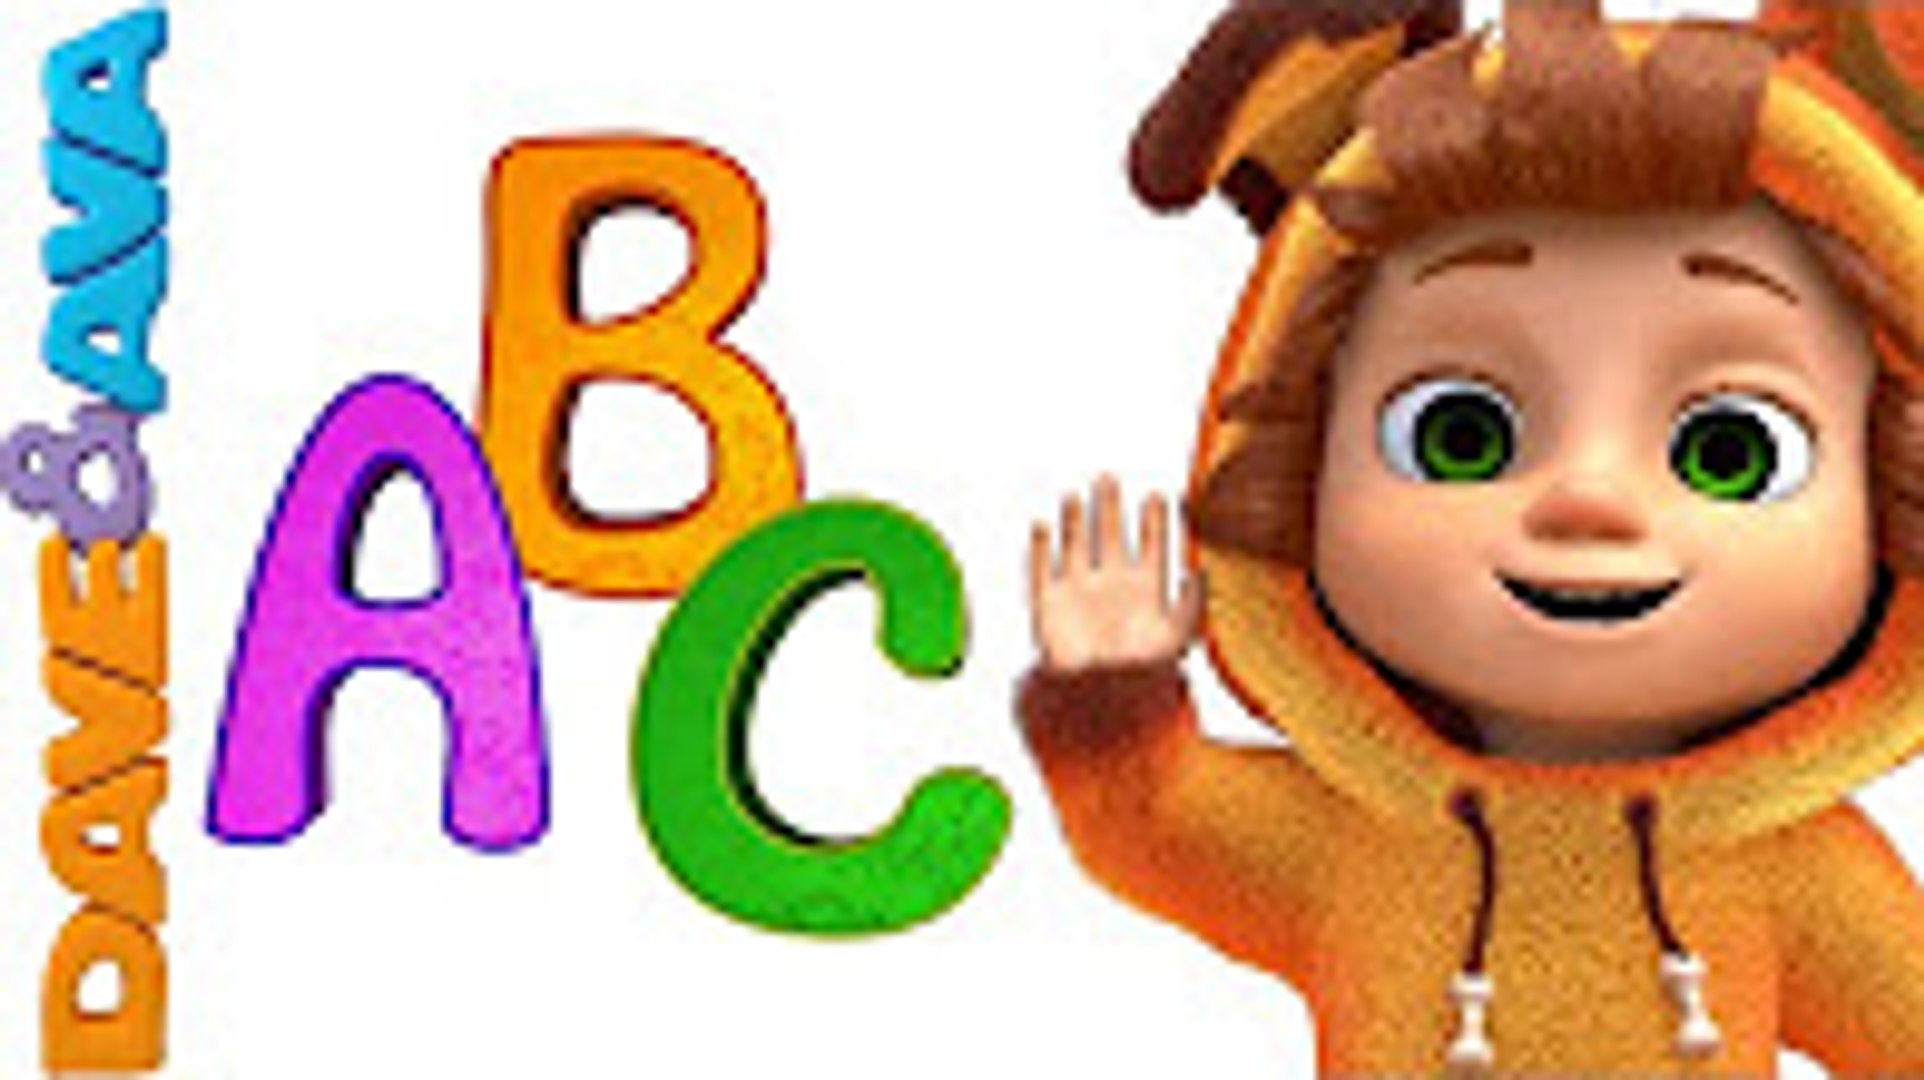 ABC Song - Nursery Rhymes and Abcd Song - Alphabet Song from Dave and Ava -  video Dailymotion